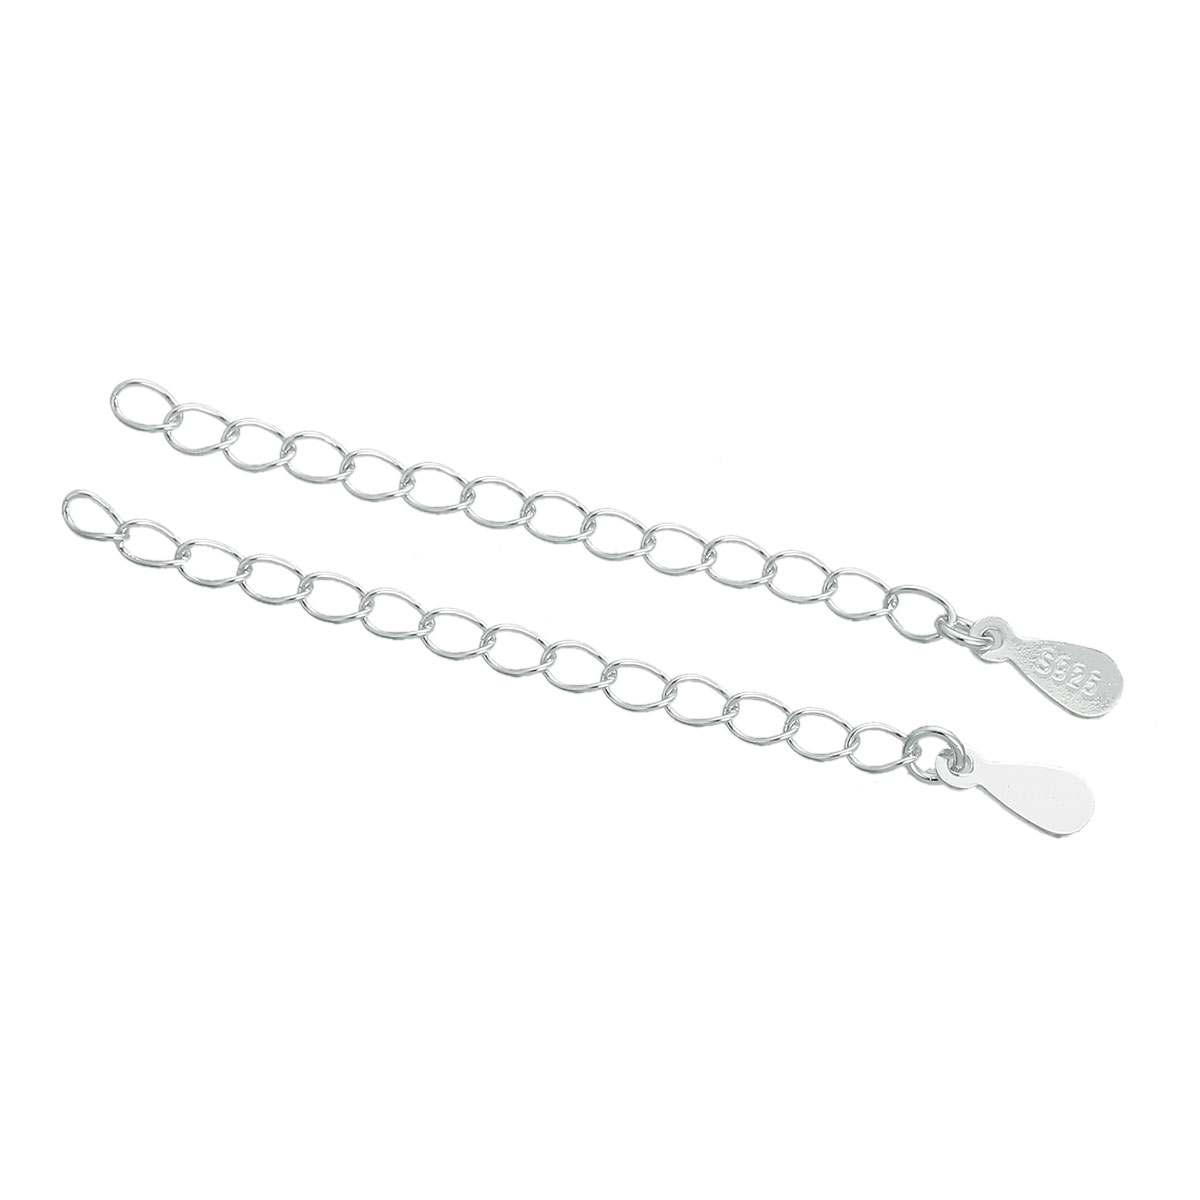 Picture of Sterling Silver Extender Chain For Jewelry Necklace Bracelet Silver With Drop Pendant 5.1cm(2"), 1 Piece